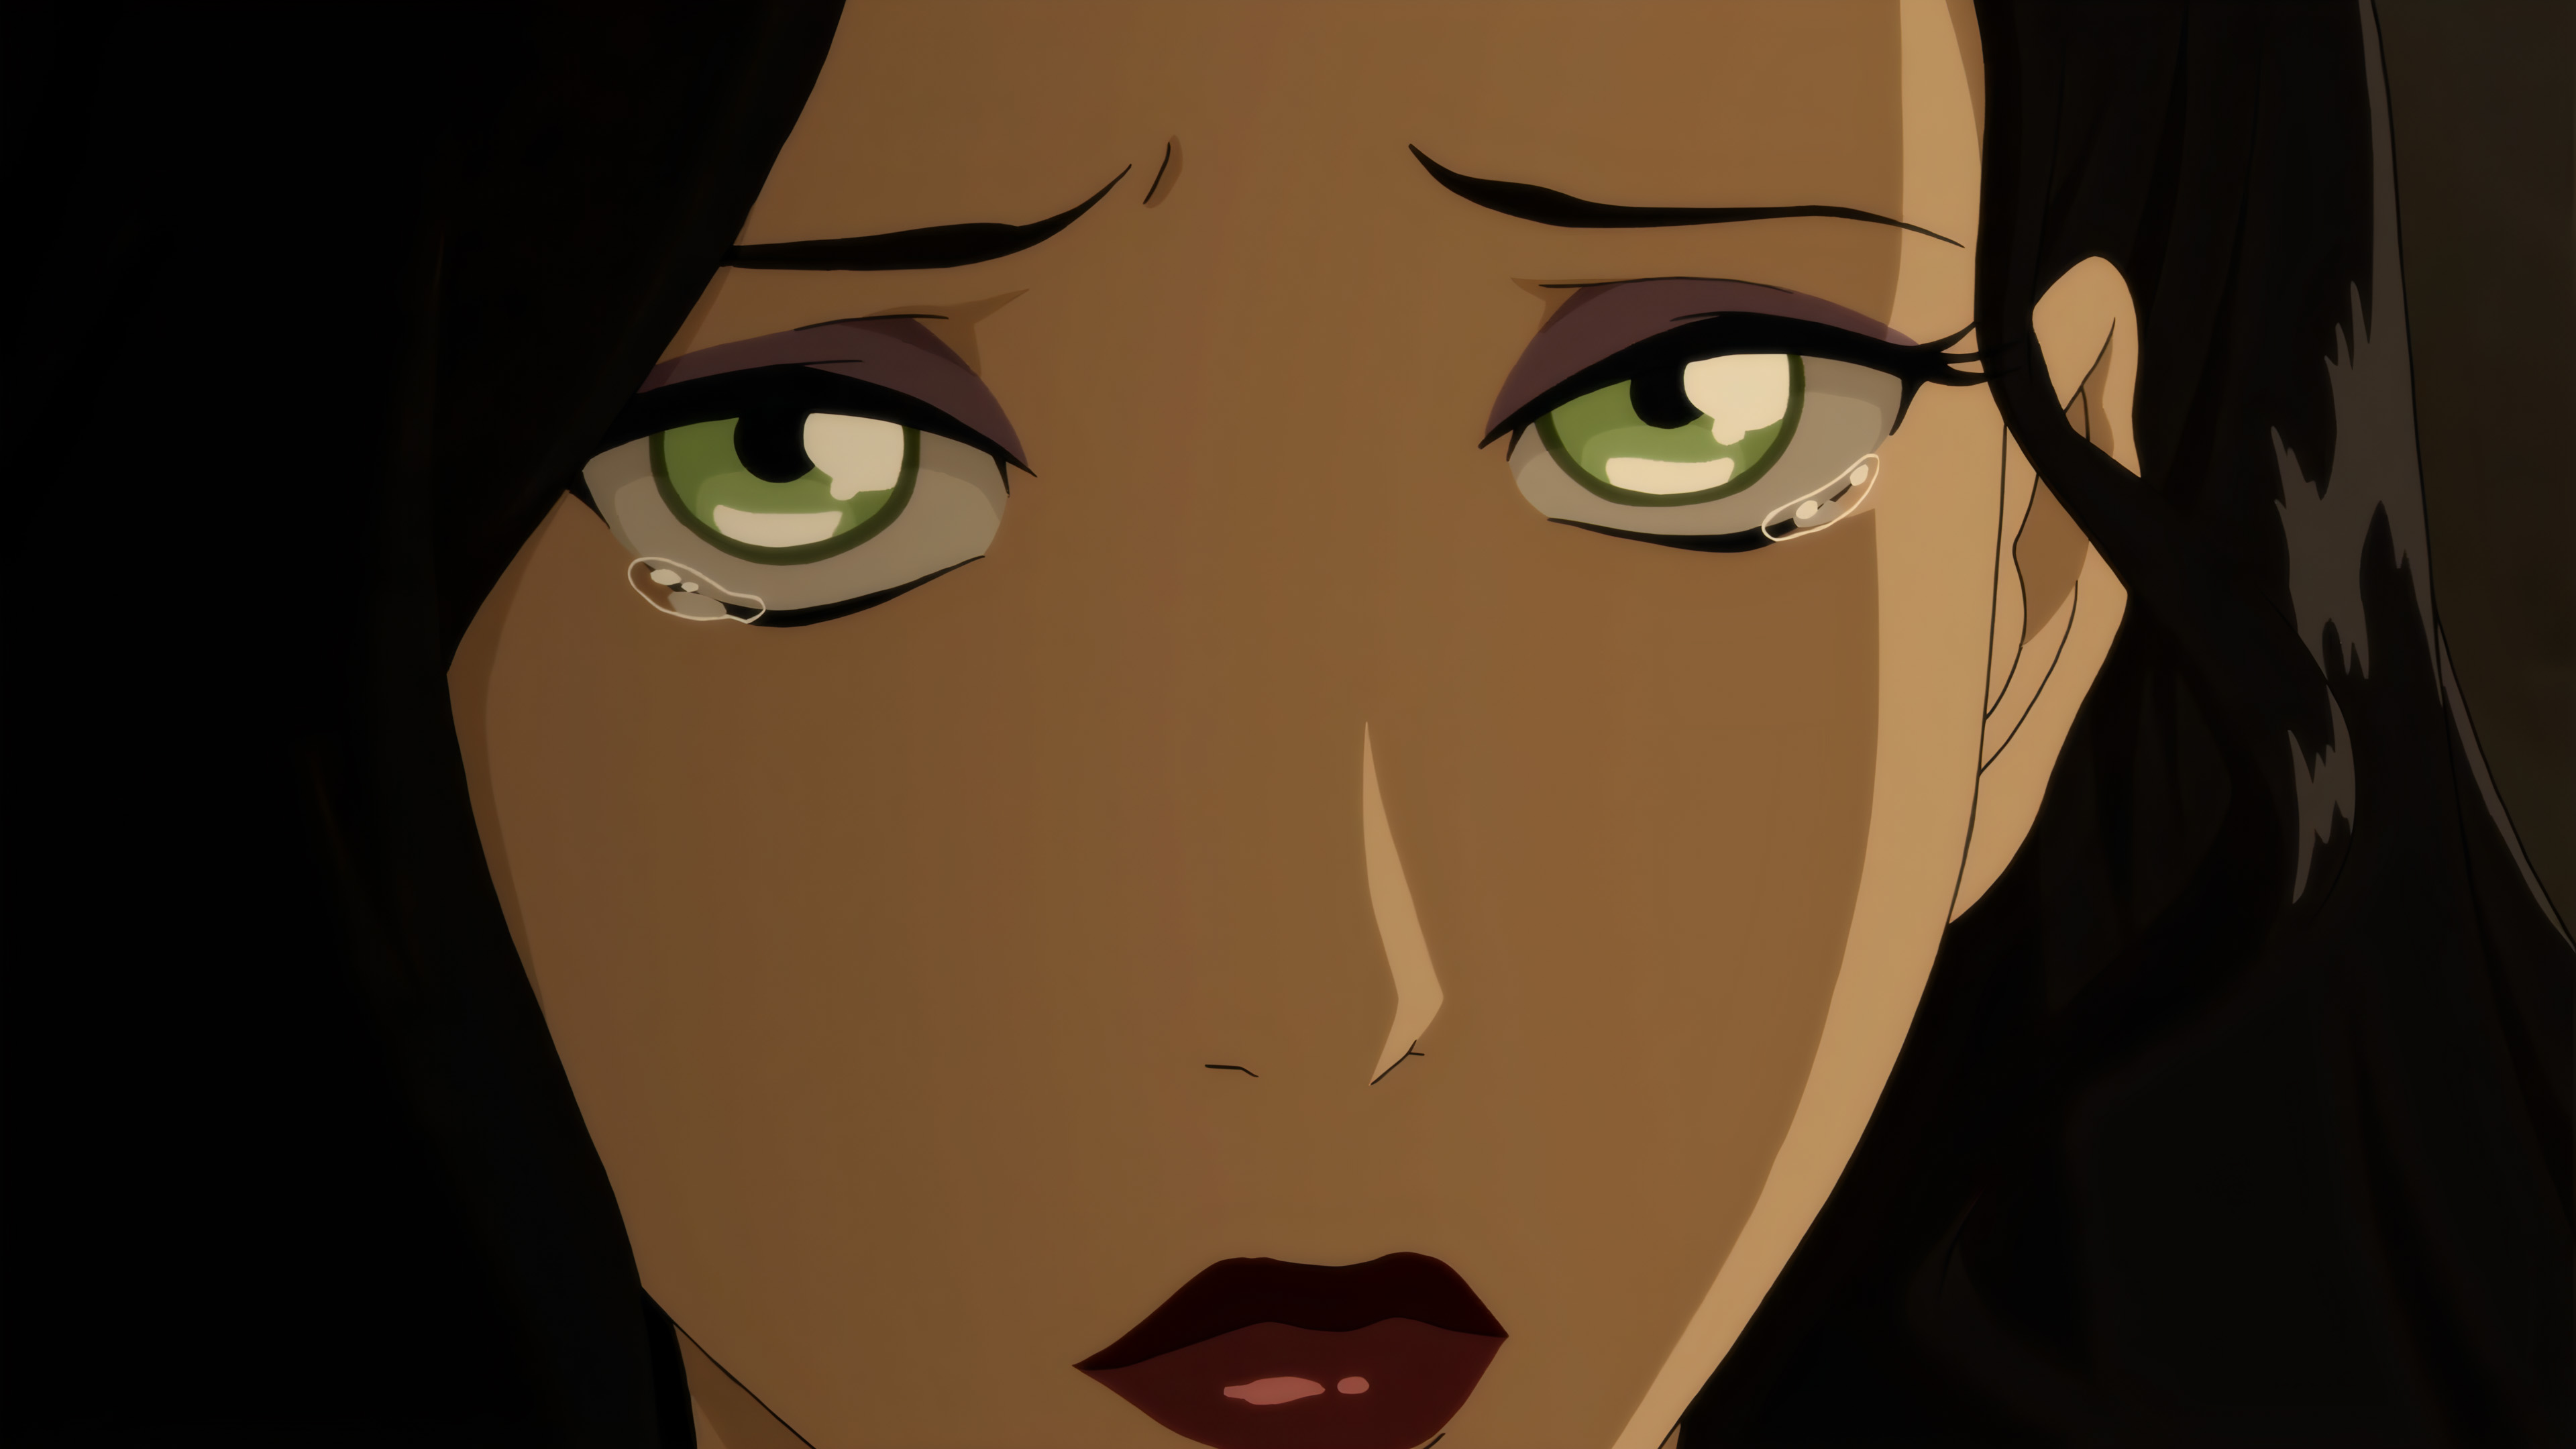 Anime 3840x2160 screen shot upscaled The Legend of Korra face Asami Sato red lipstick looking at viewer lipstick tears closed mouth black hair green eyes closeup